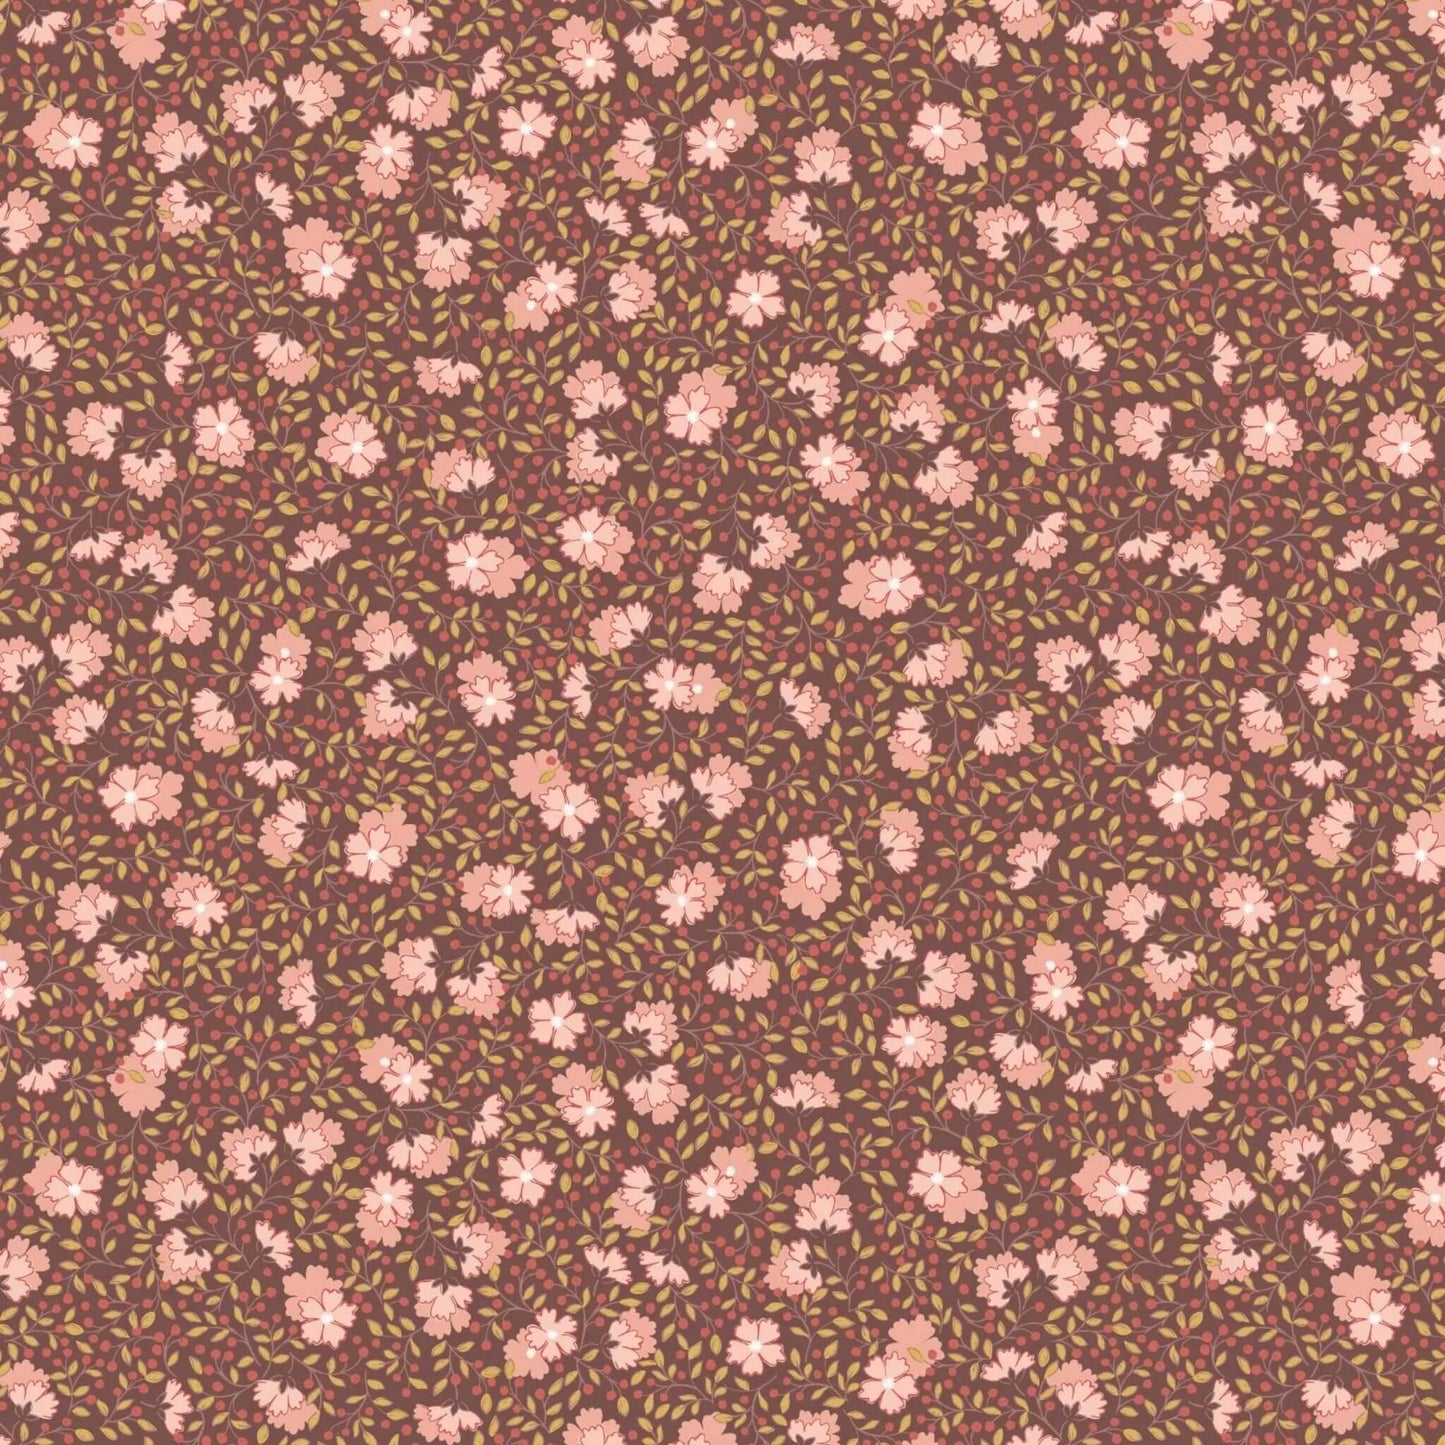 Ditzy Floral - Hannahs Flowers Fabric Range - Lewis and Irene - Chocolate